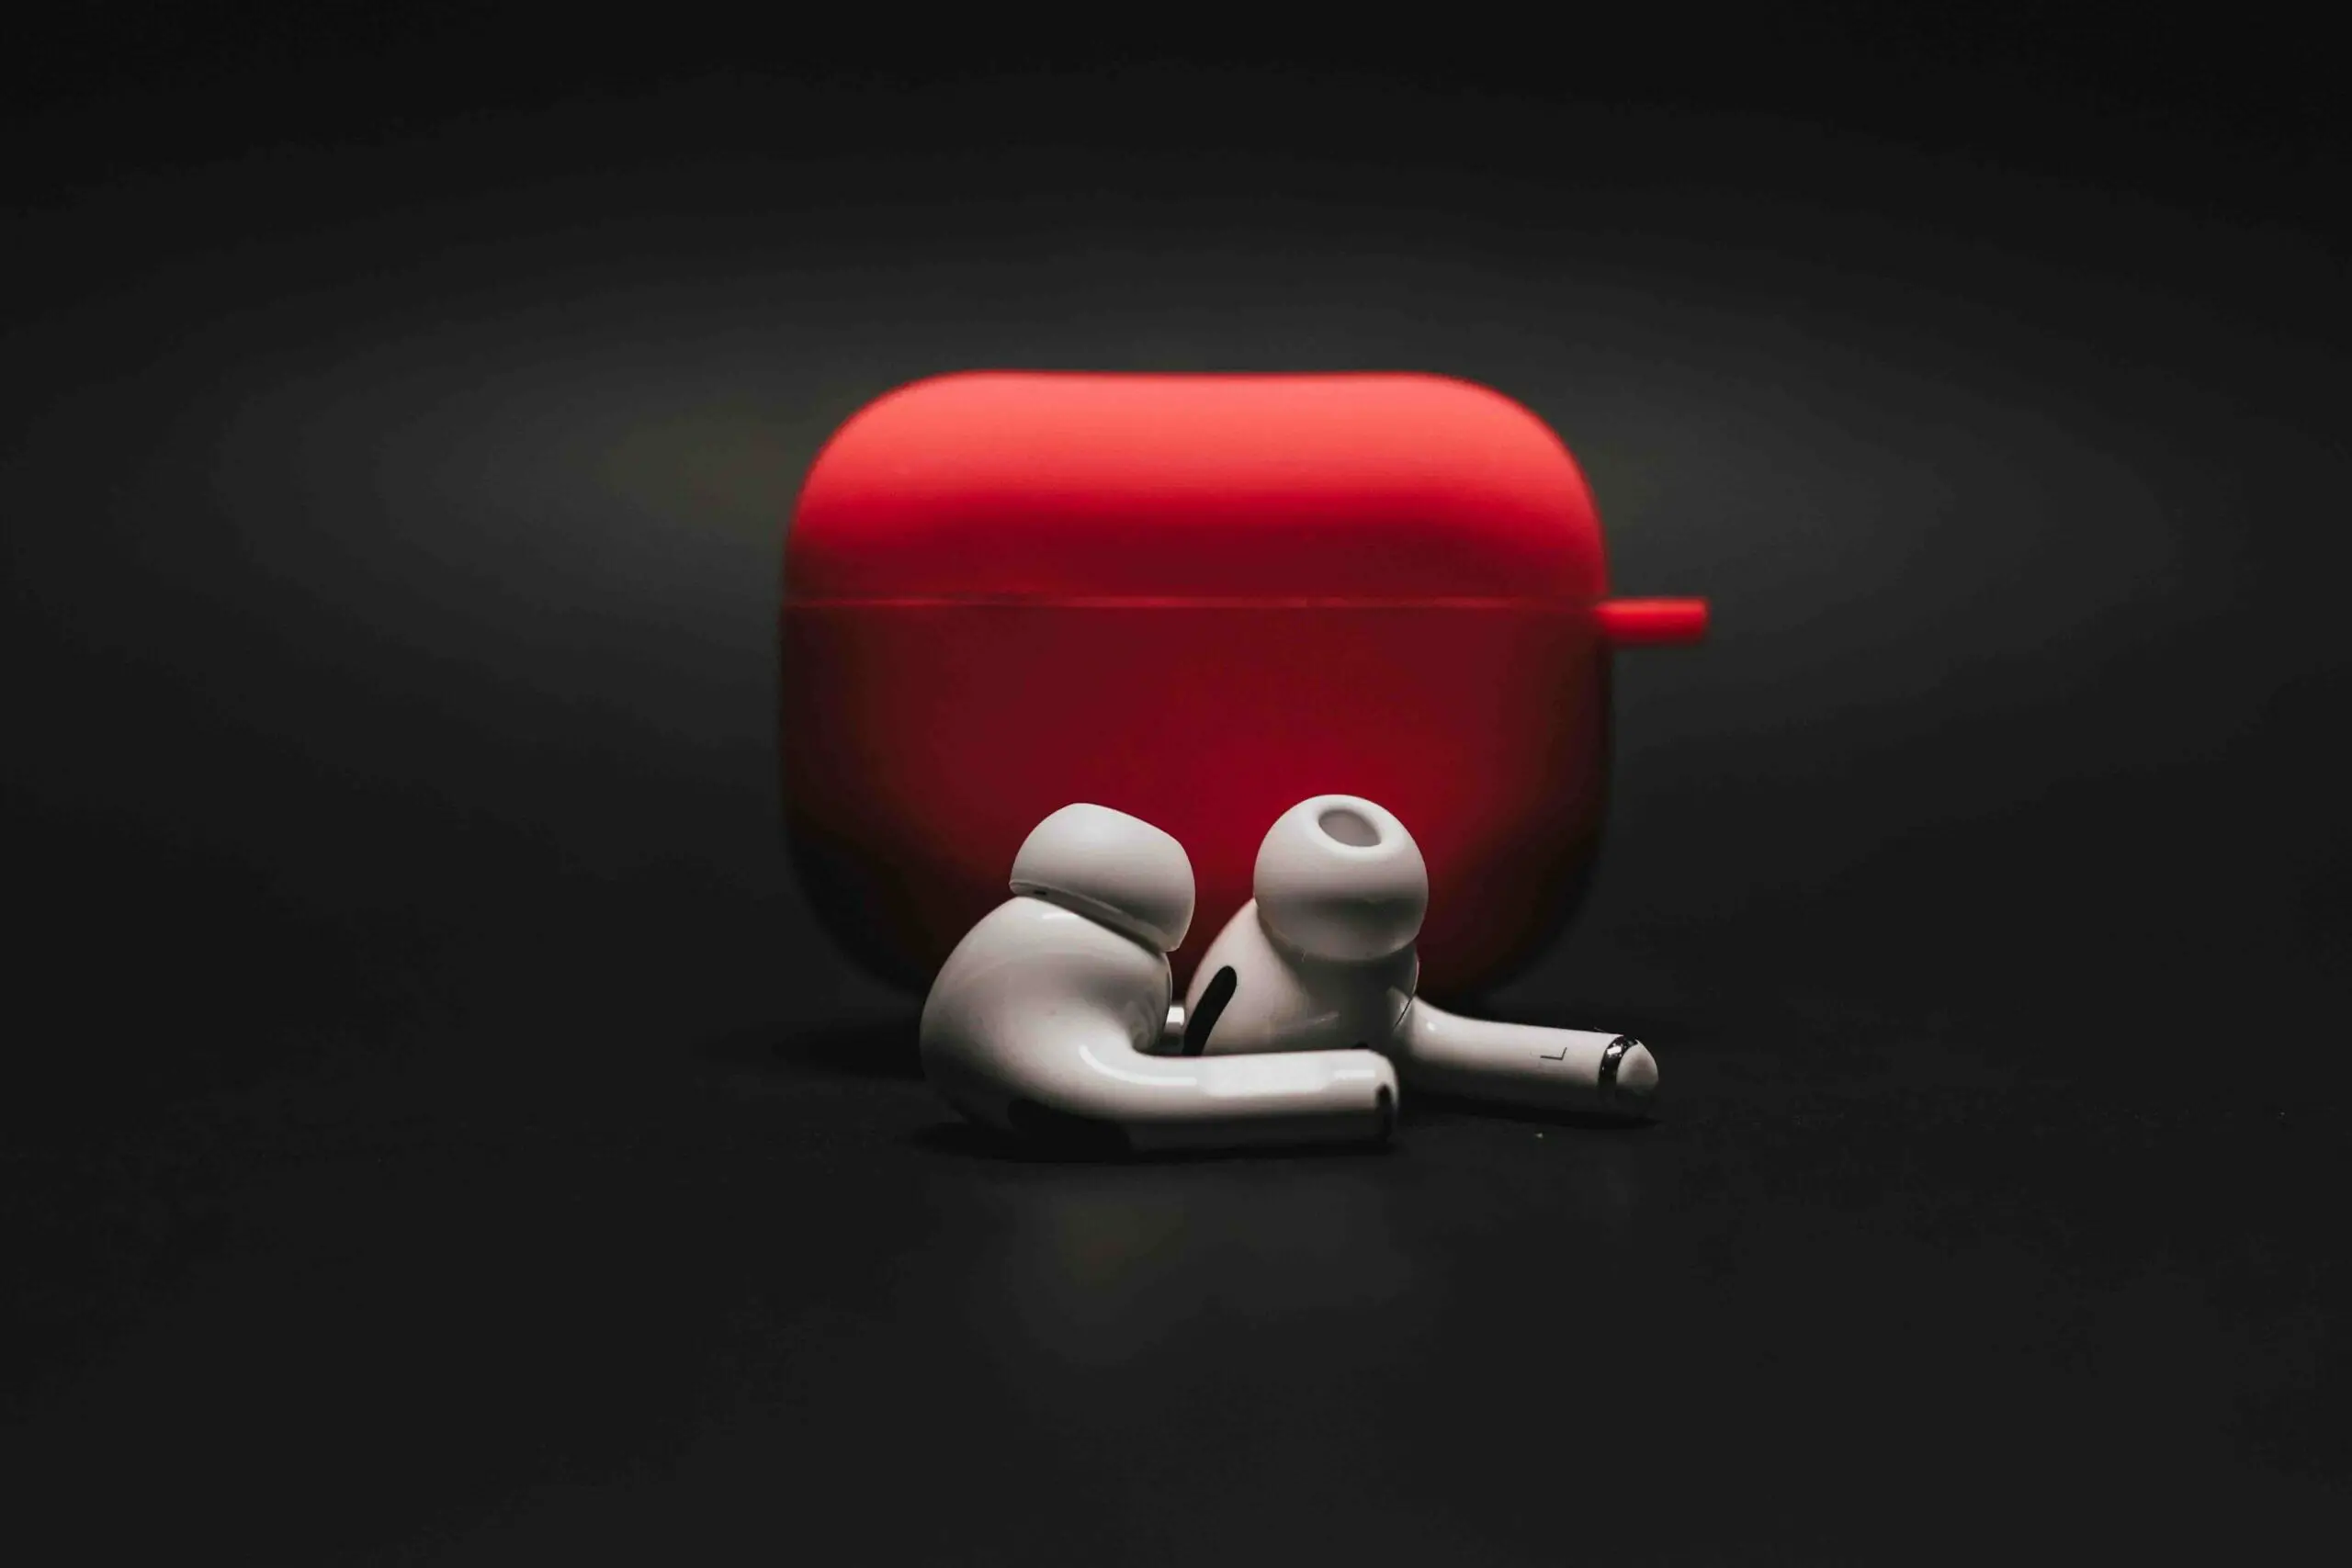 an earbuds with a red case in a dark background